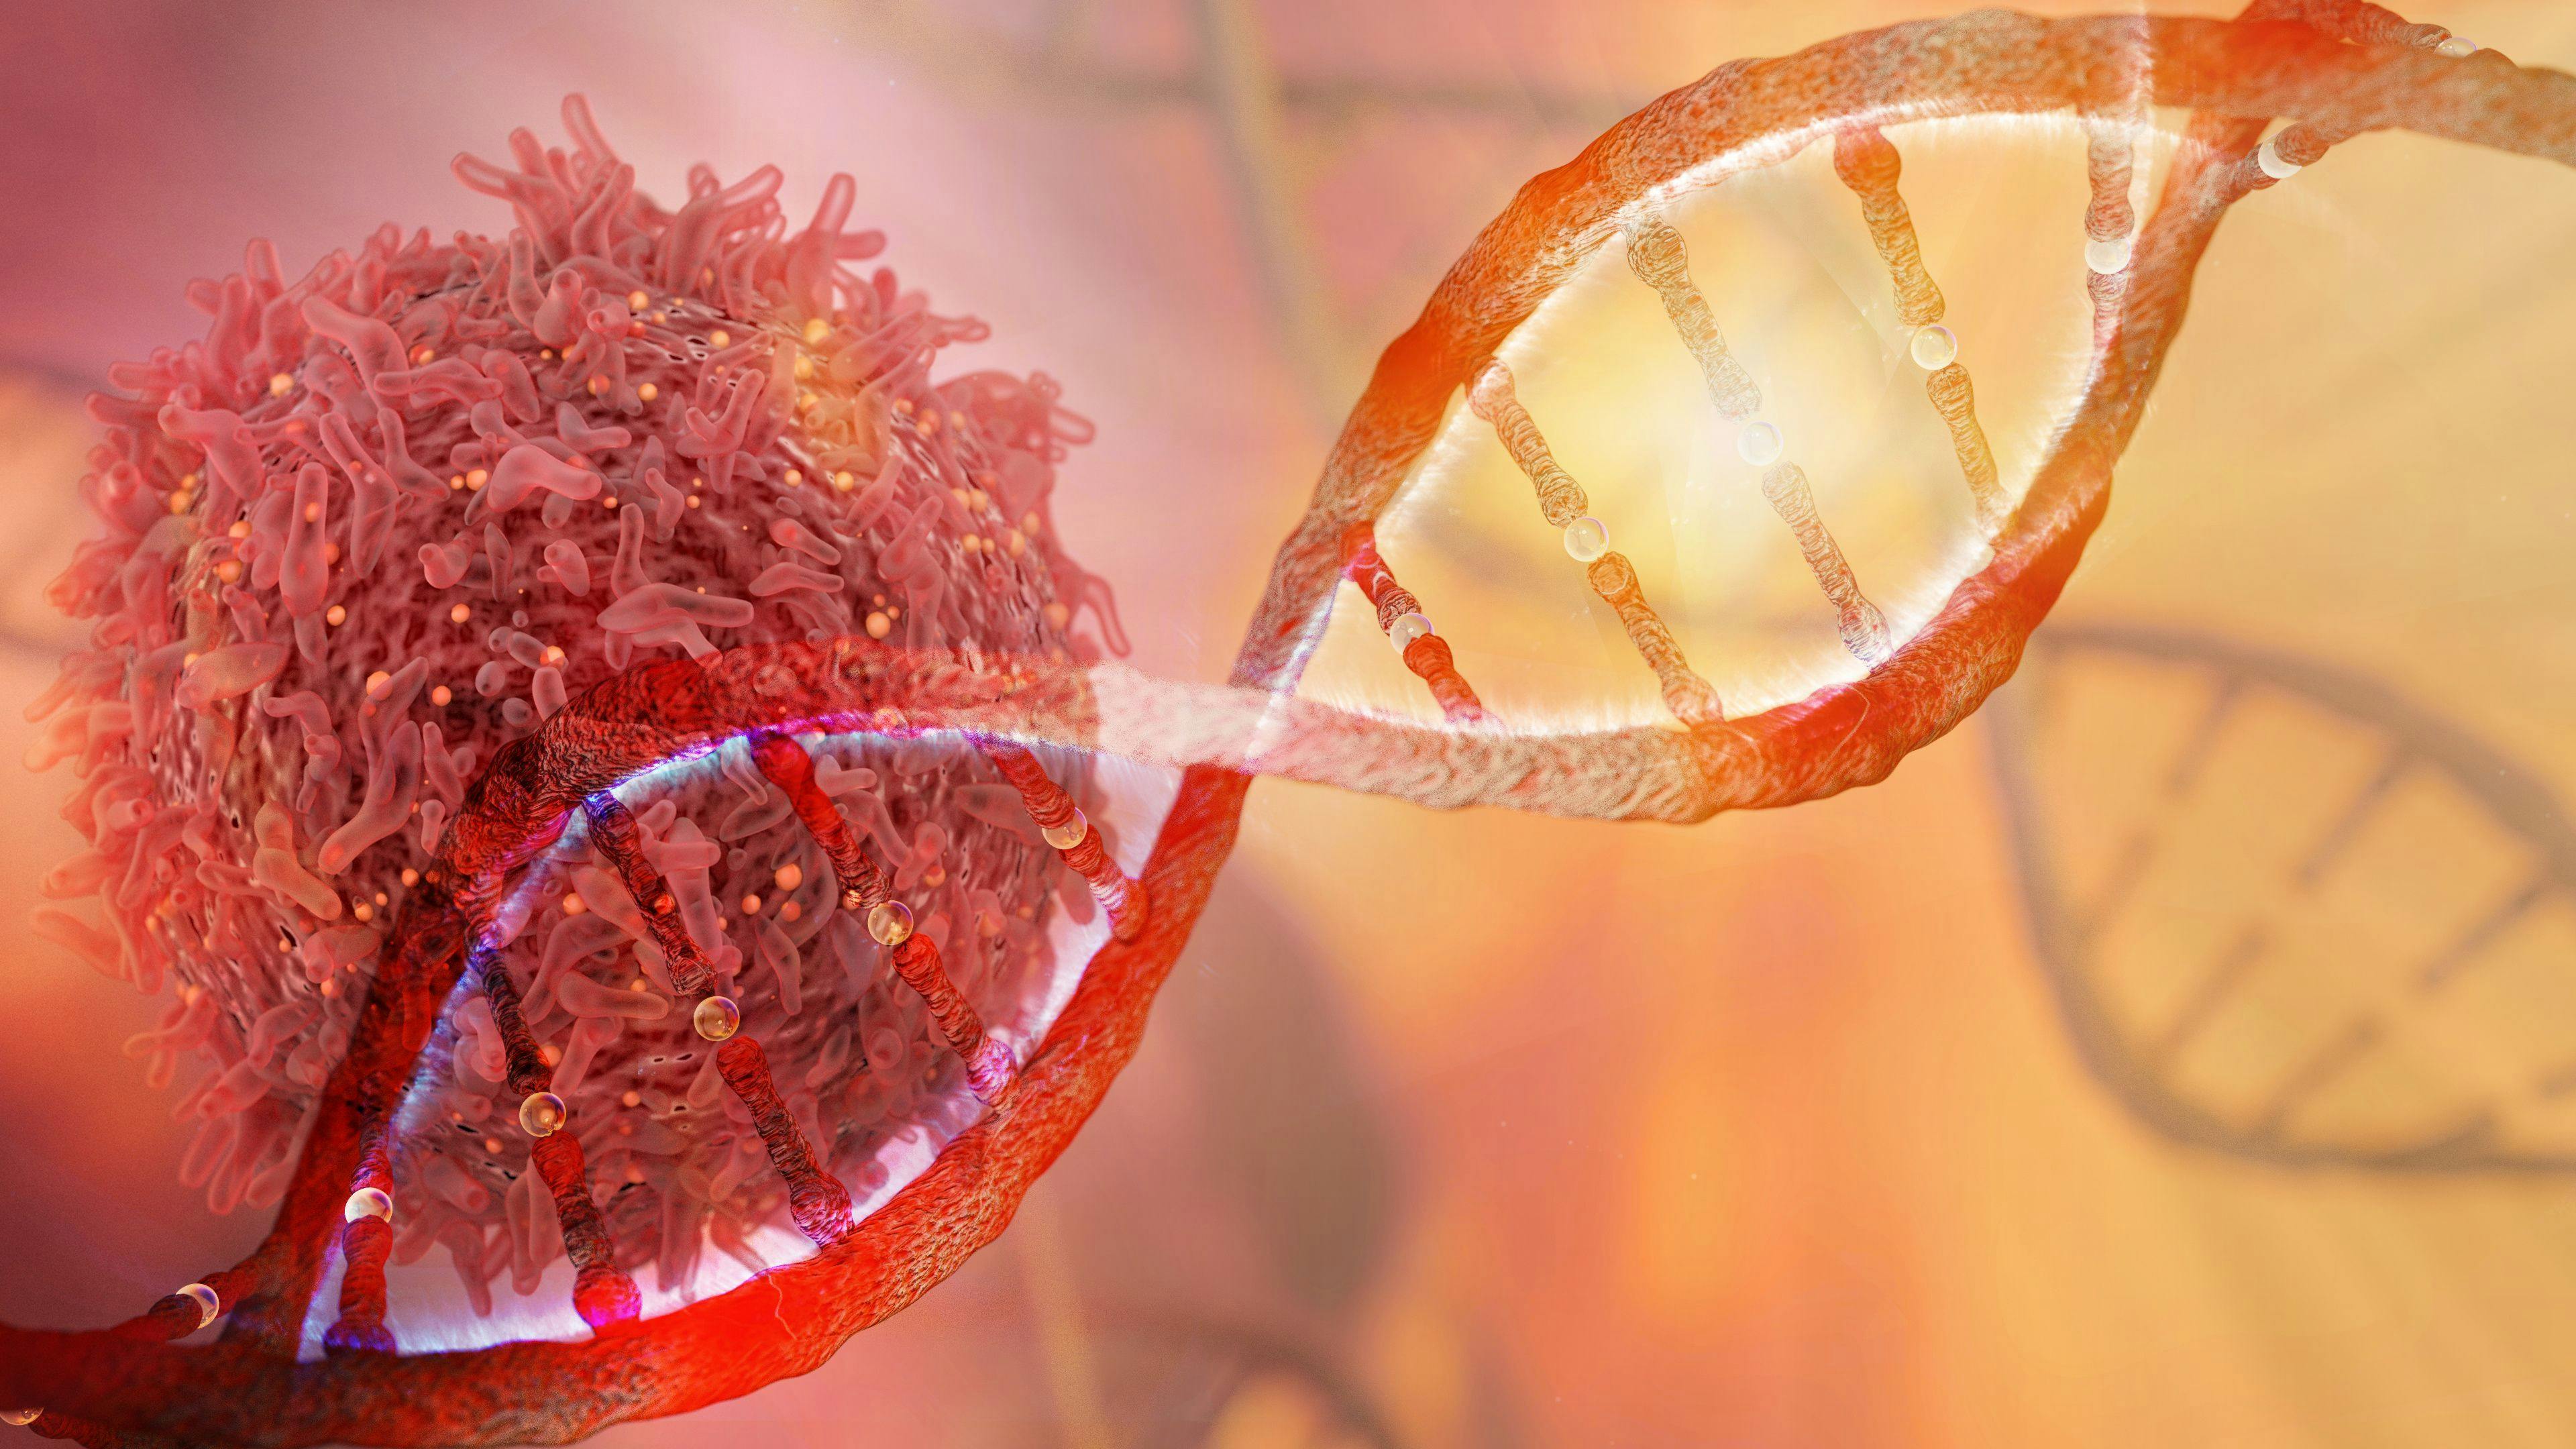 DNA strand and cancer cell: ©catalin - stock.adobe.com